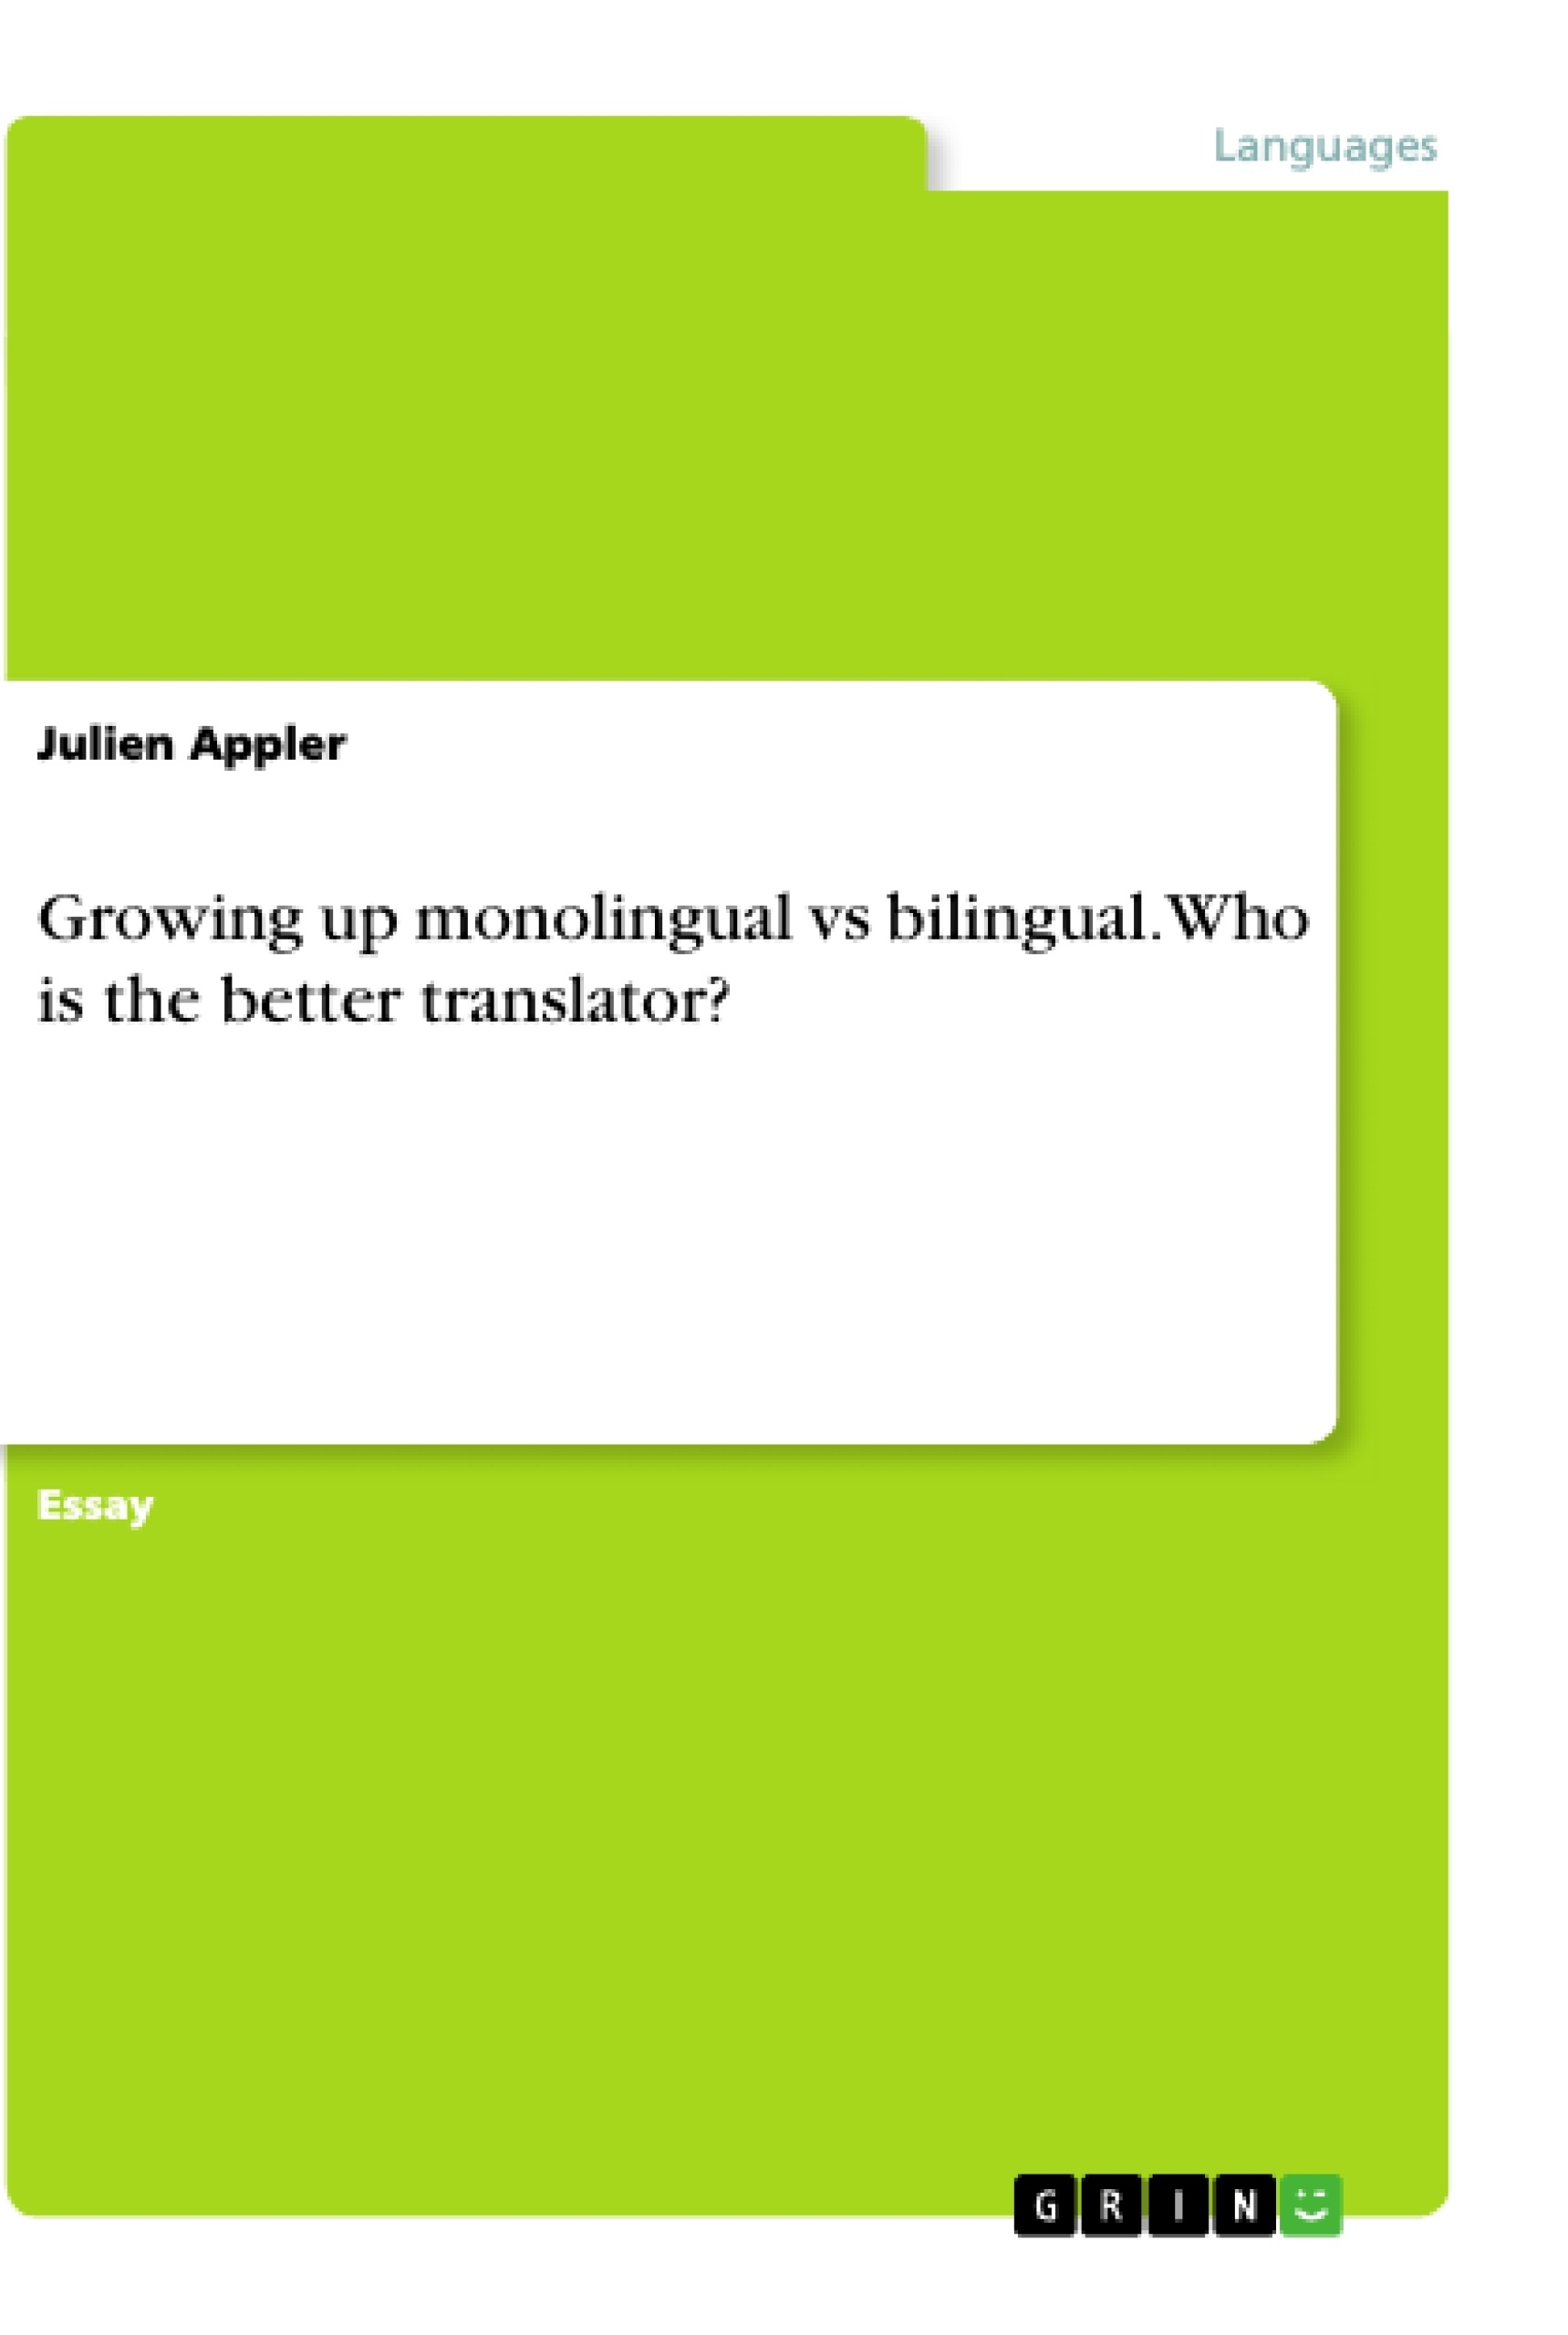 Titre: Growing up monolingual vs bilingual. Who is the better translator?